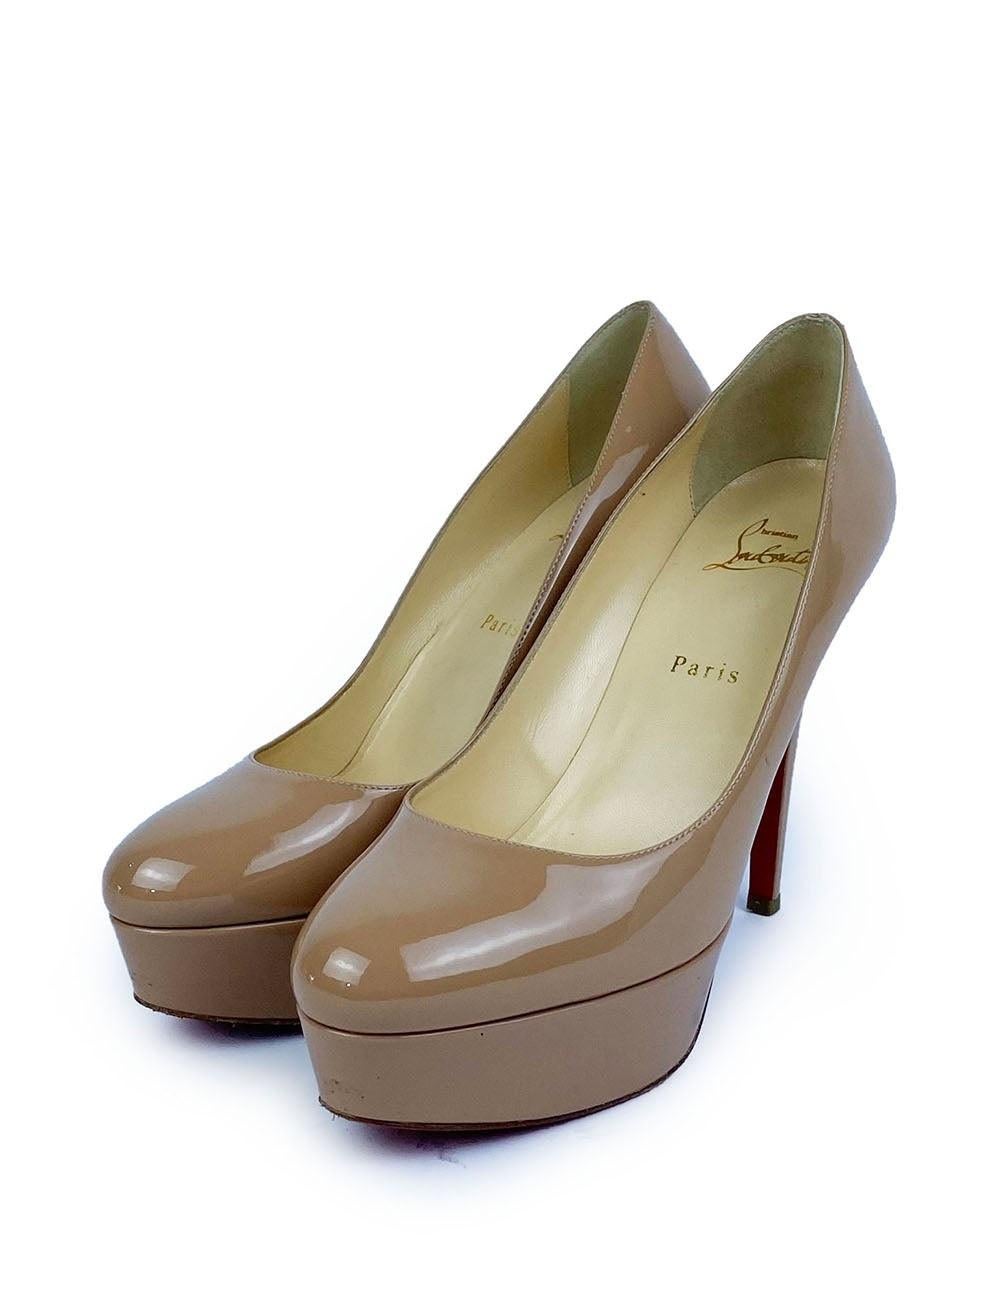 Christian Louboutin Nude Patent Leather Bianca Platform Pumps.

Additional information:
Material: Leather,
Size: EU 39.5
Measurements:
Heel length: 12 cm
Overall Condition: Good
Interior Condition: signs of wear
Exterior Condition: leather